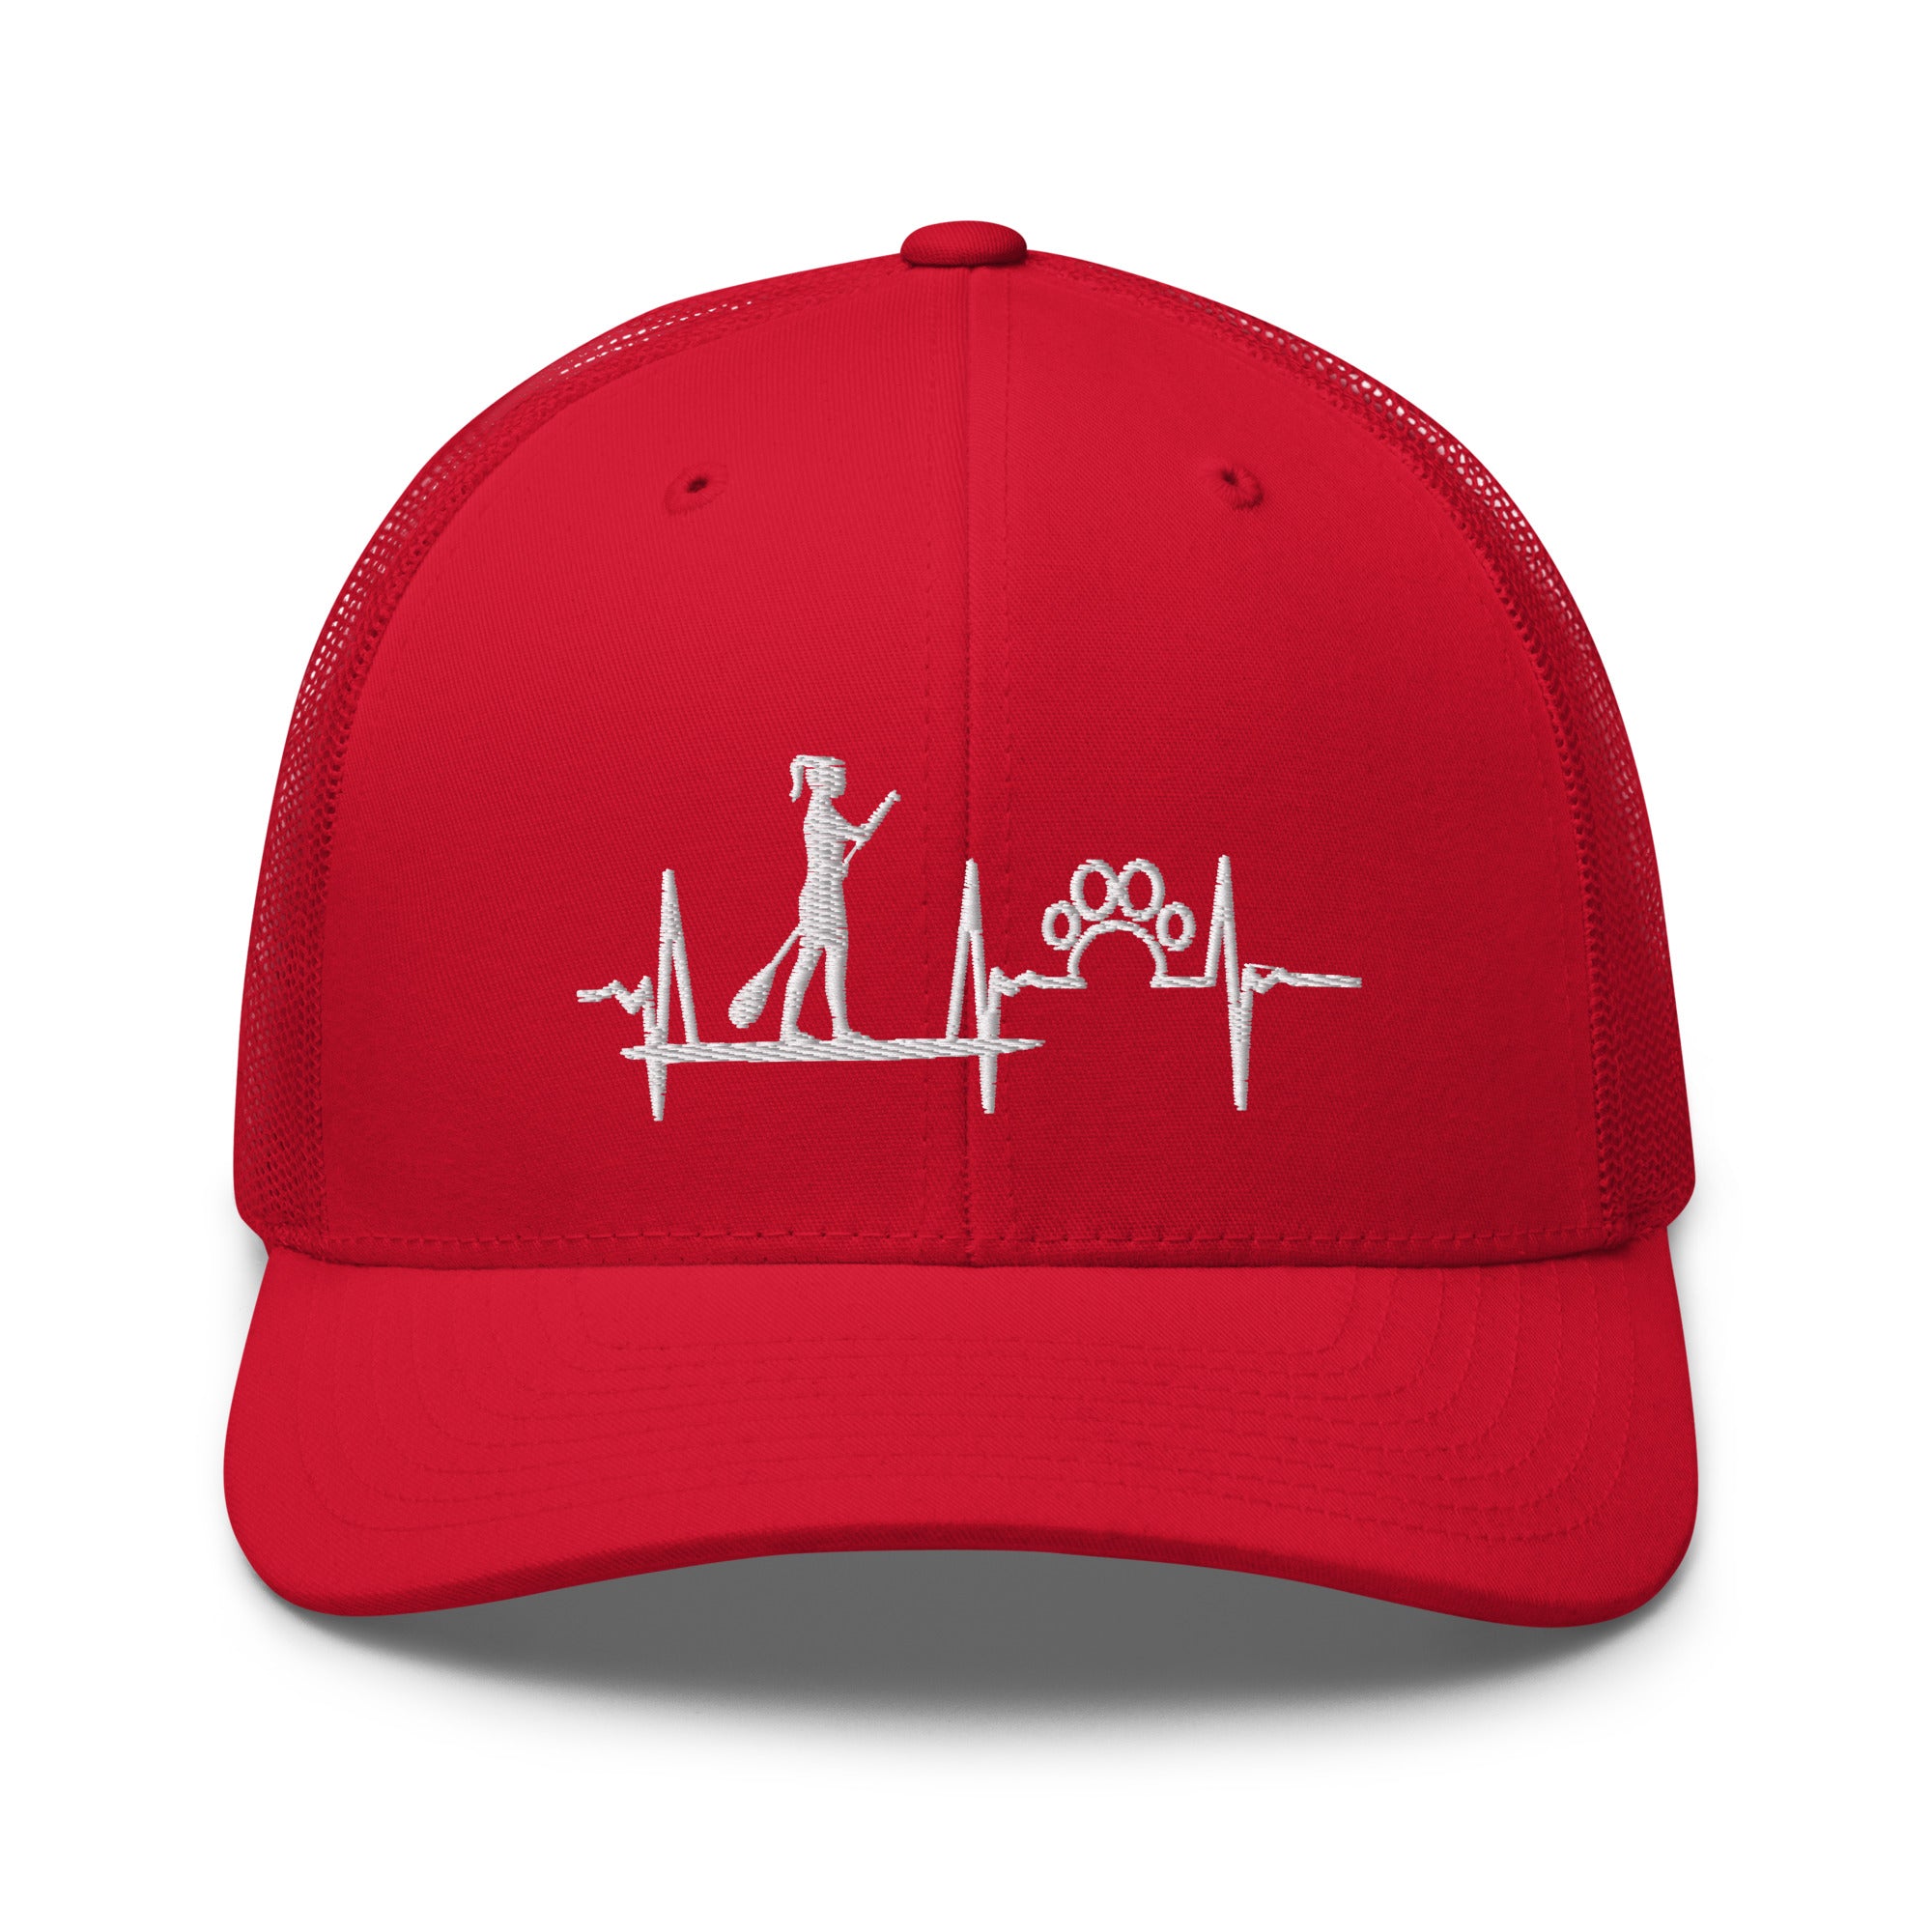 Paddle Board and Paw Heartbeat Mesh Cap